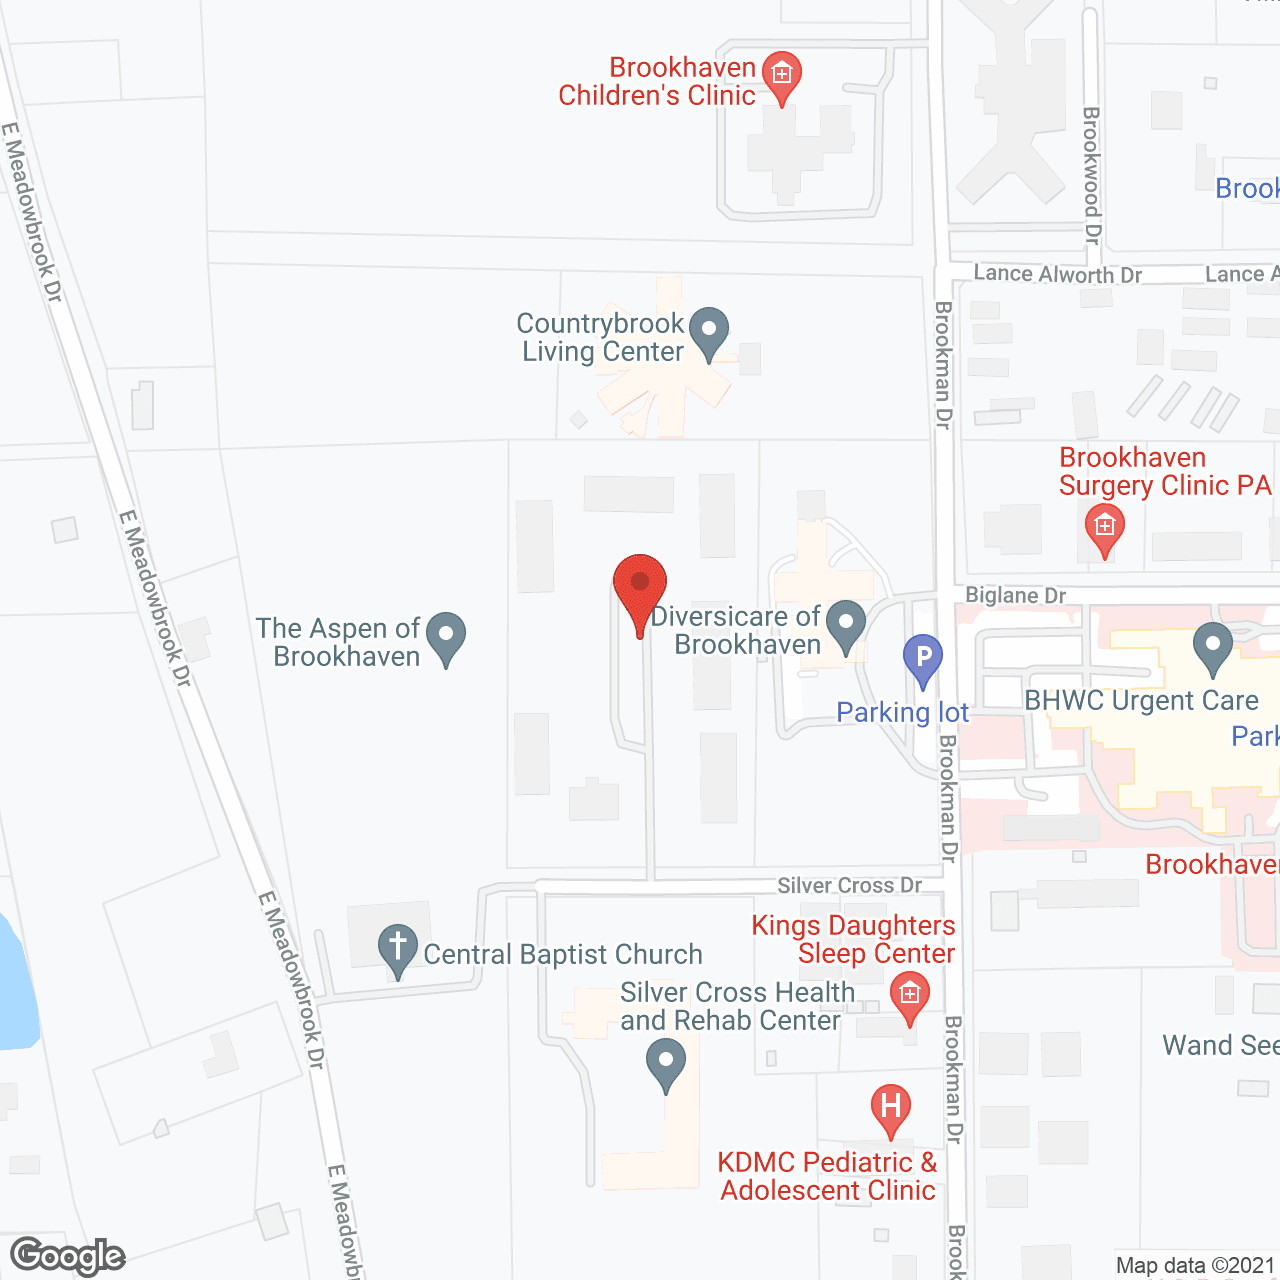 The Aspen of Brookhaven in google map